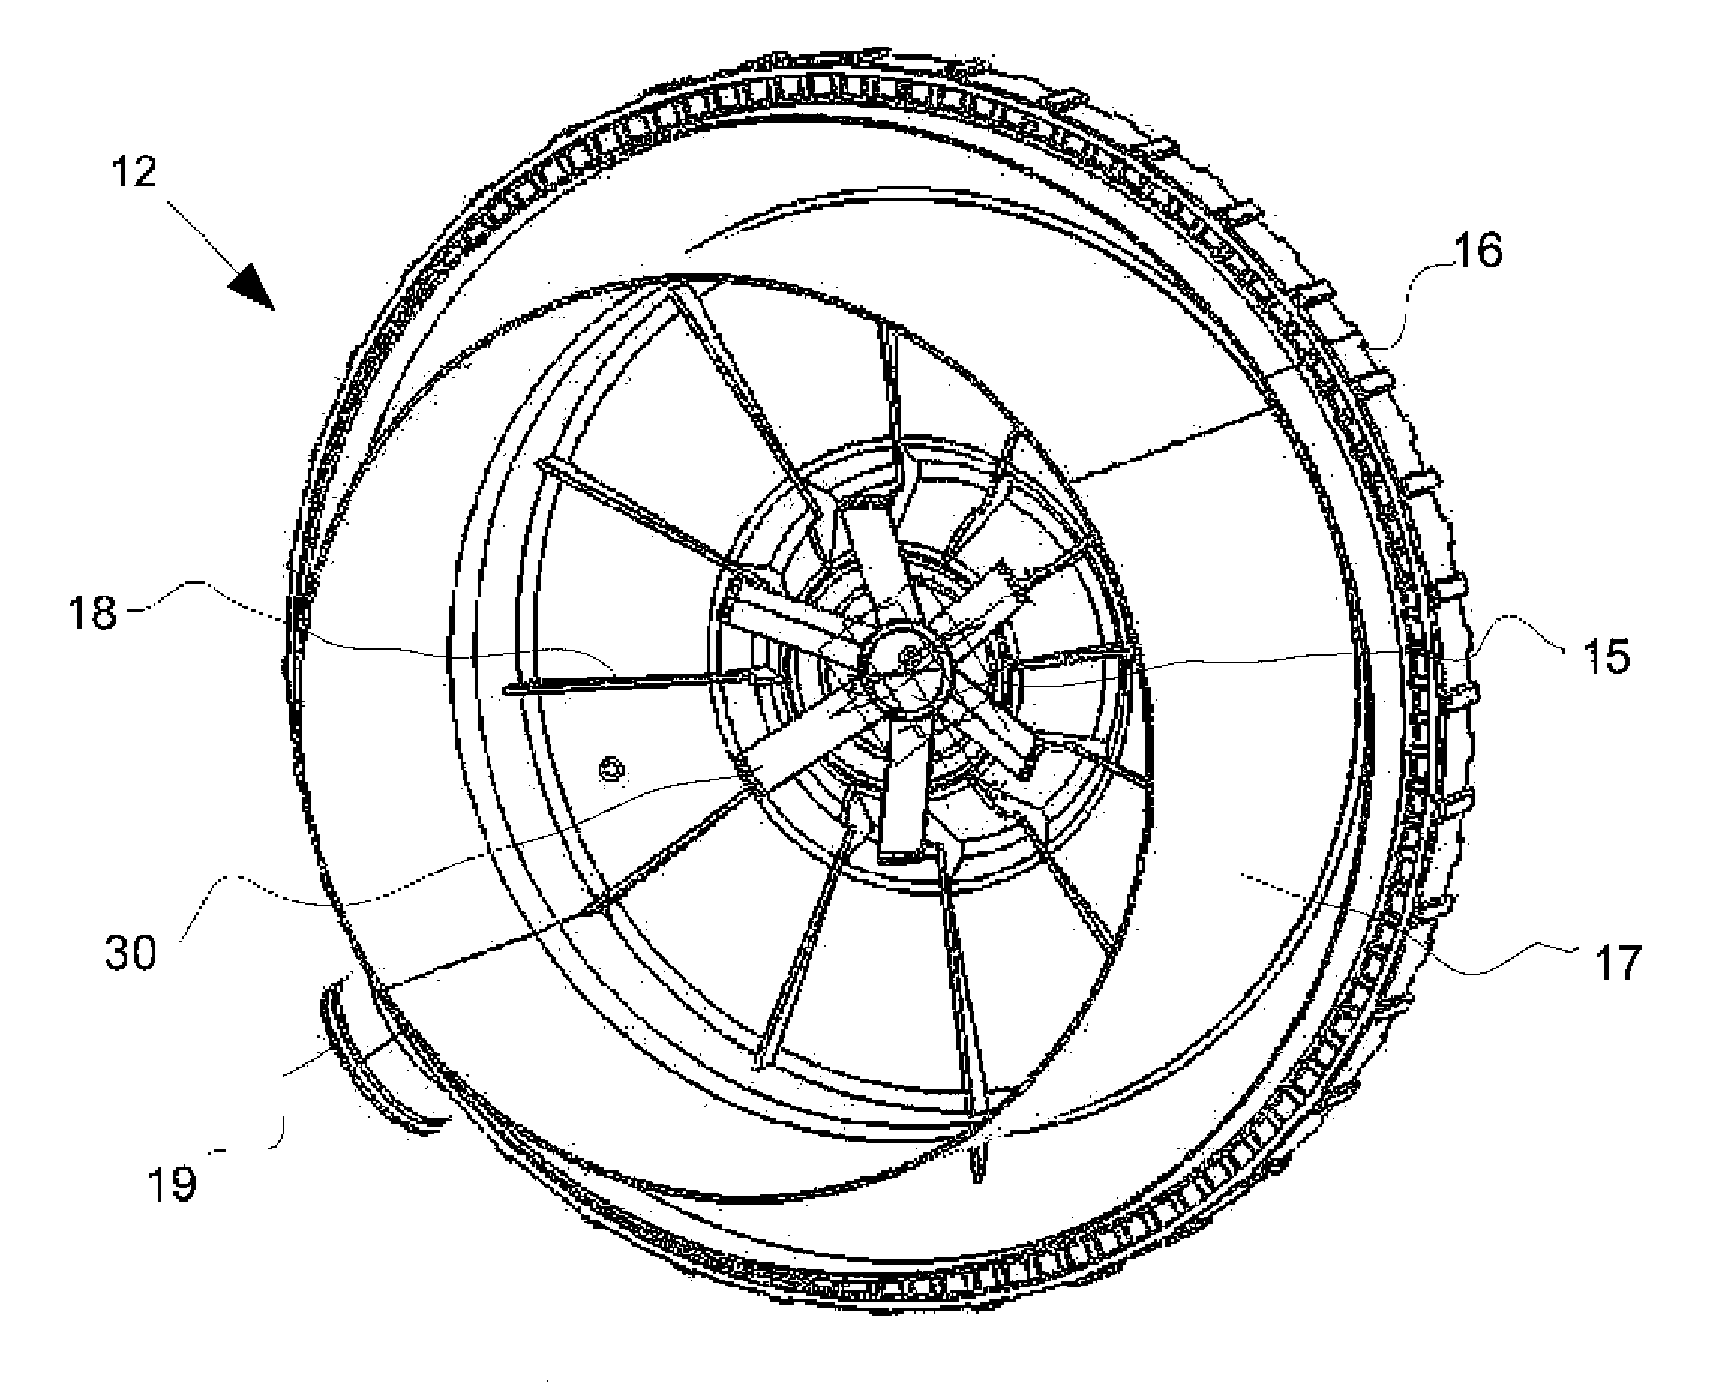 Filter element and housing for a filter element